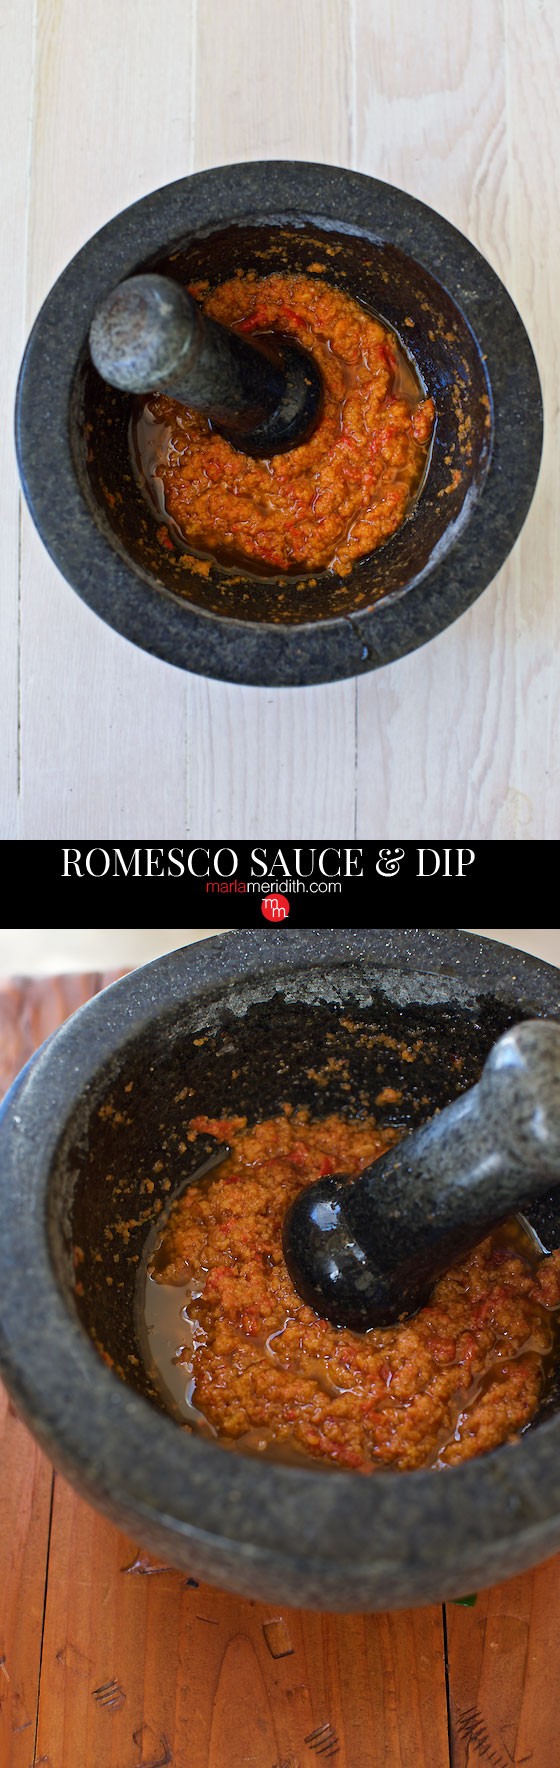 Romesco Sauce has become our go to favorite dip & sauce. A simple combination of tomatoes, red peppers, bread crumbs, and almonds. MarlaMeridith.com ( @marlameridith )